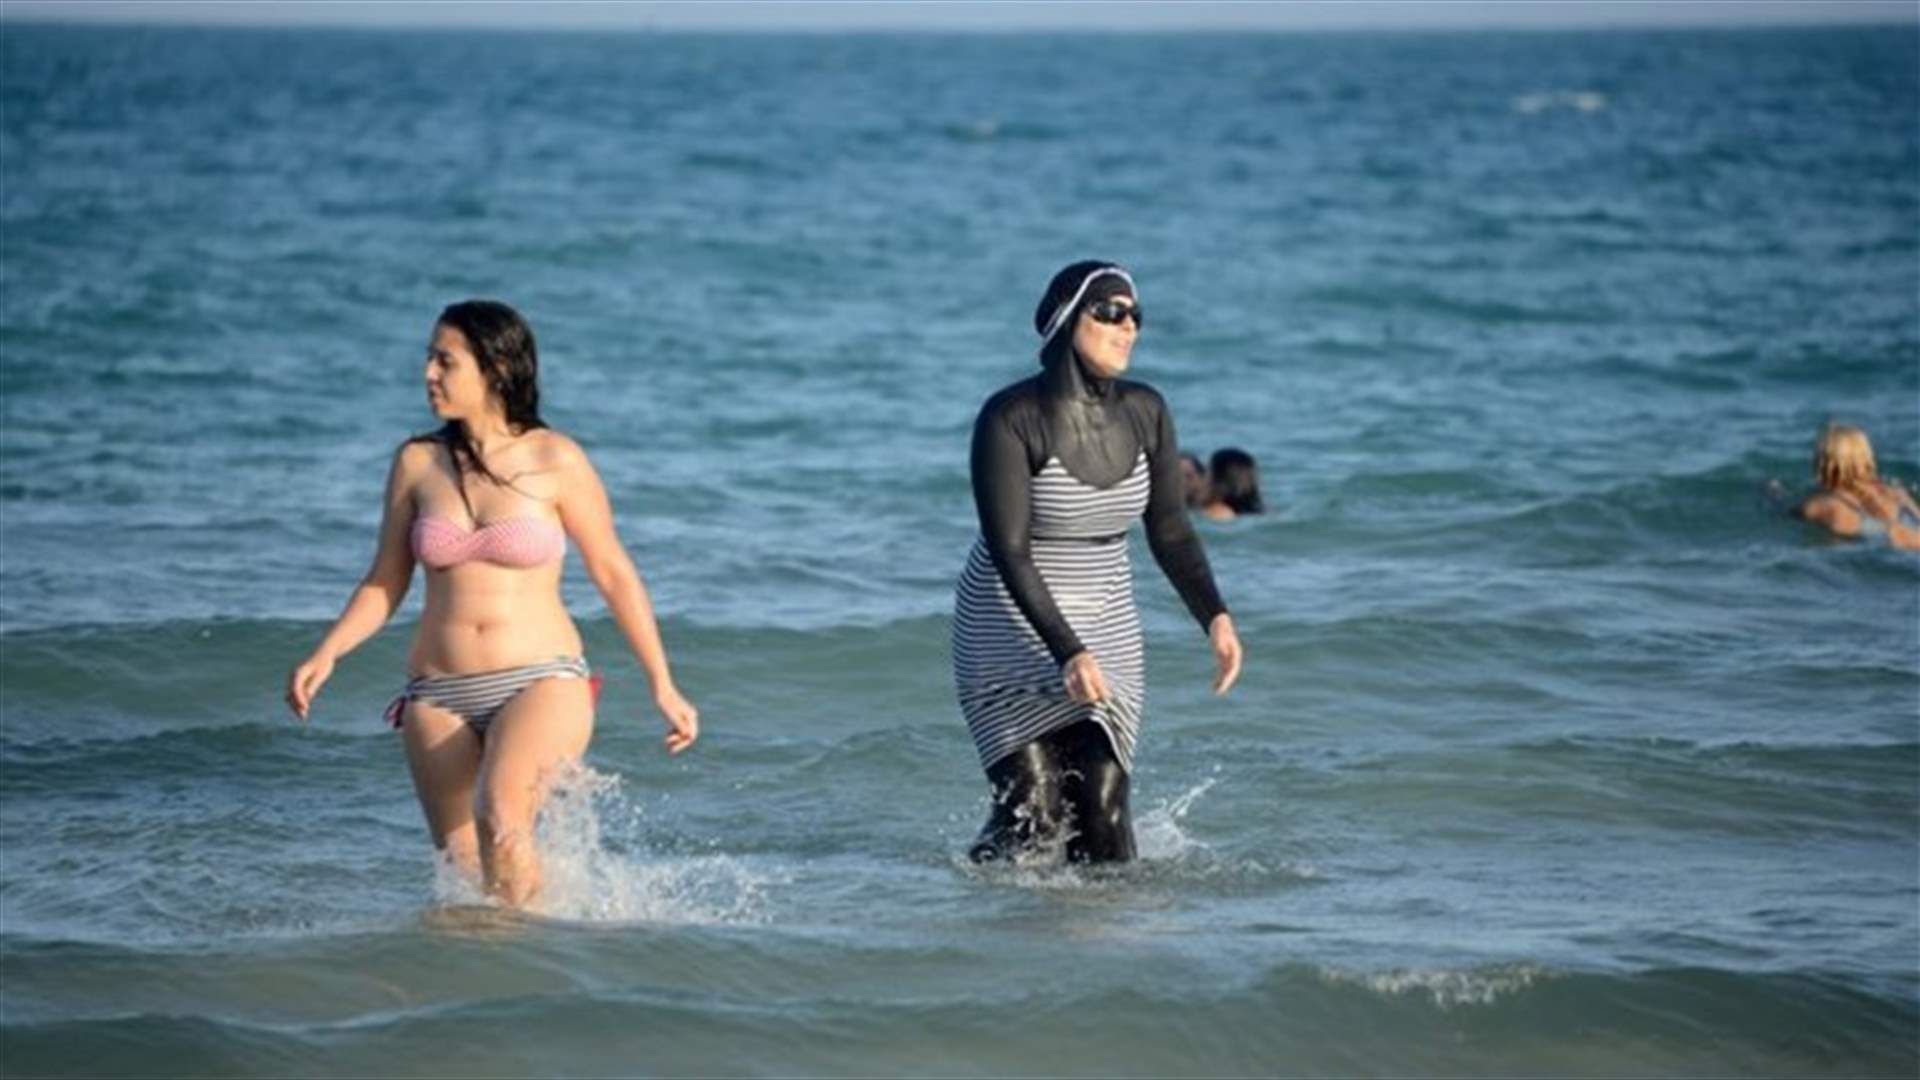 Top French court makes initial ruling to suspend burkini ban